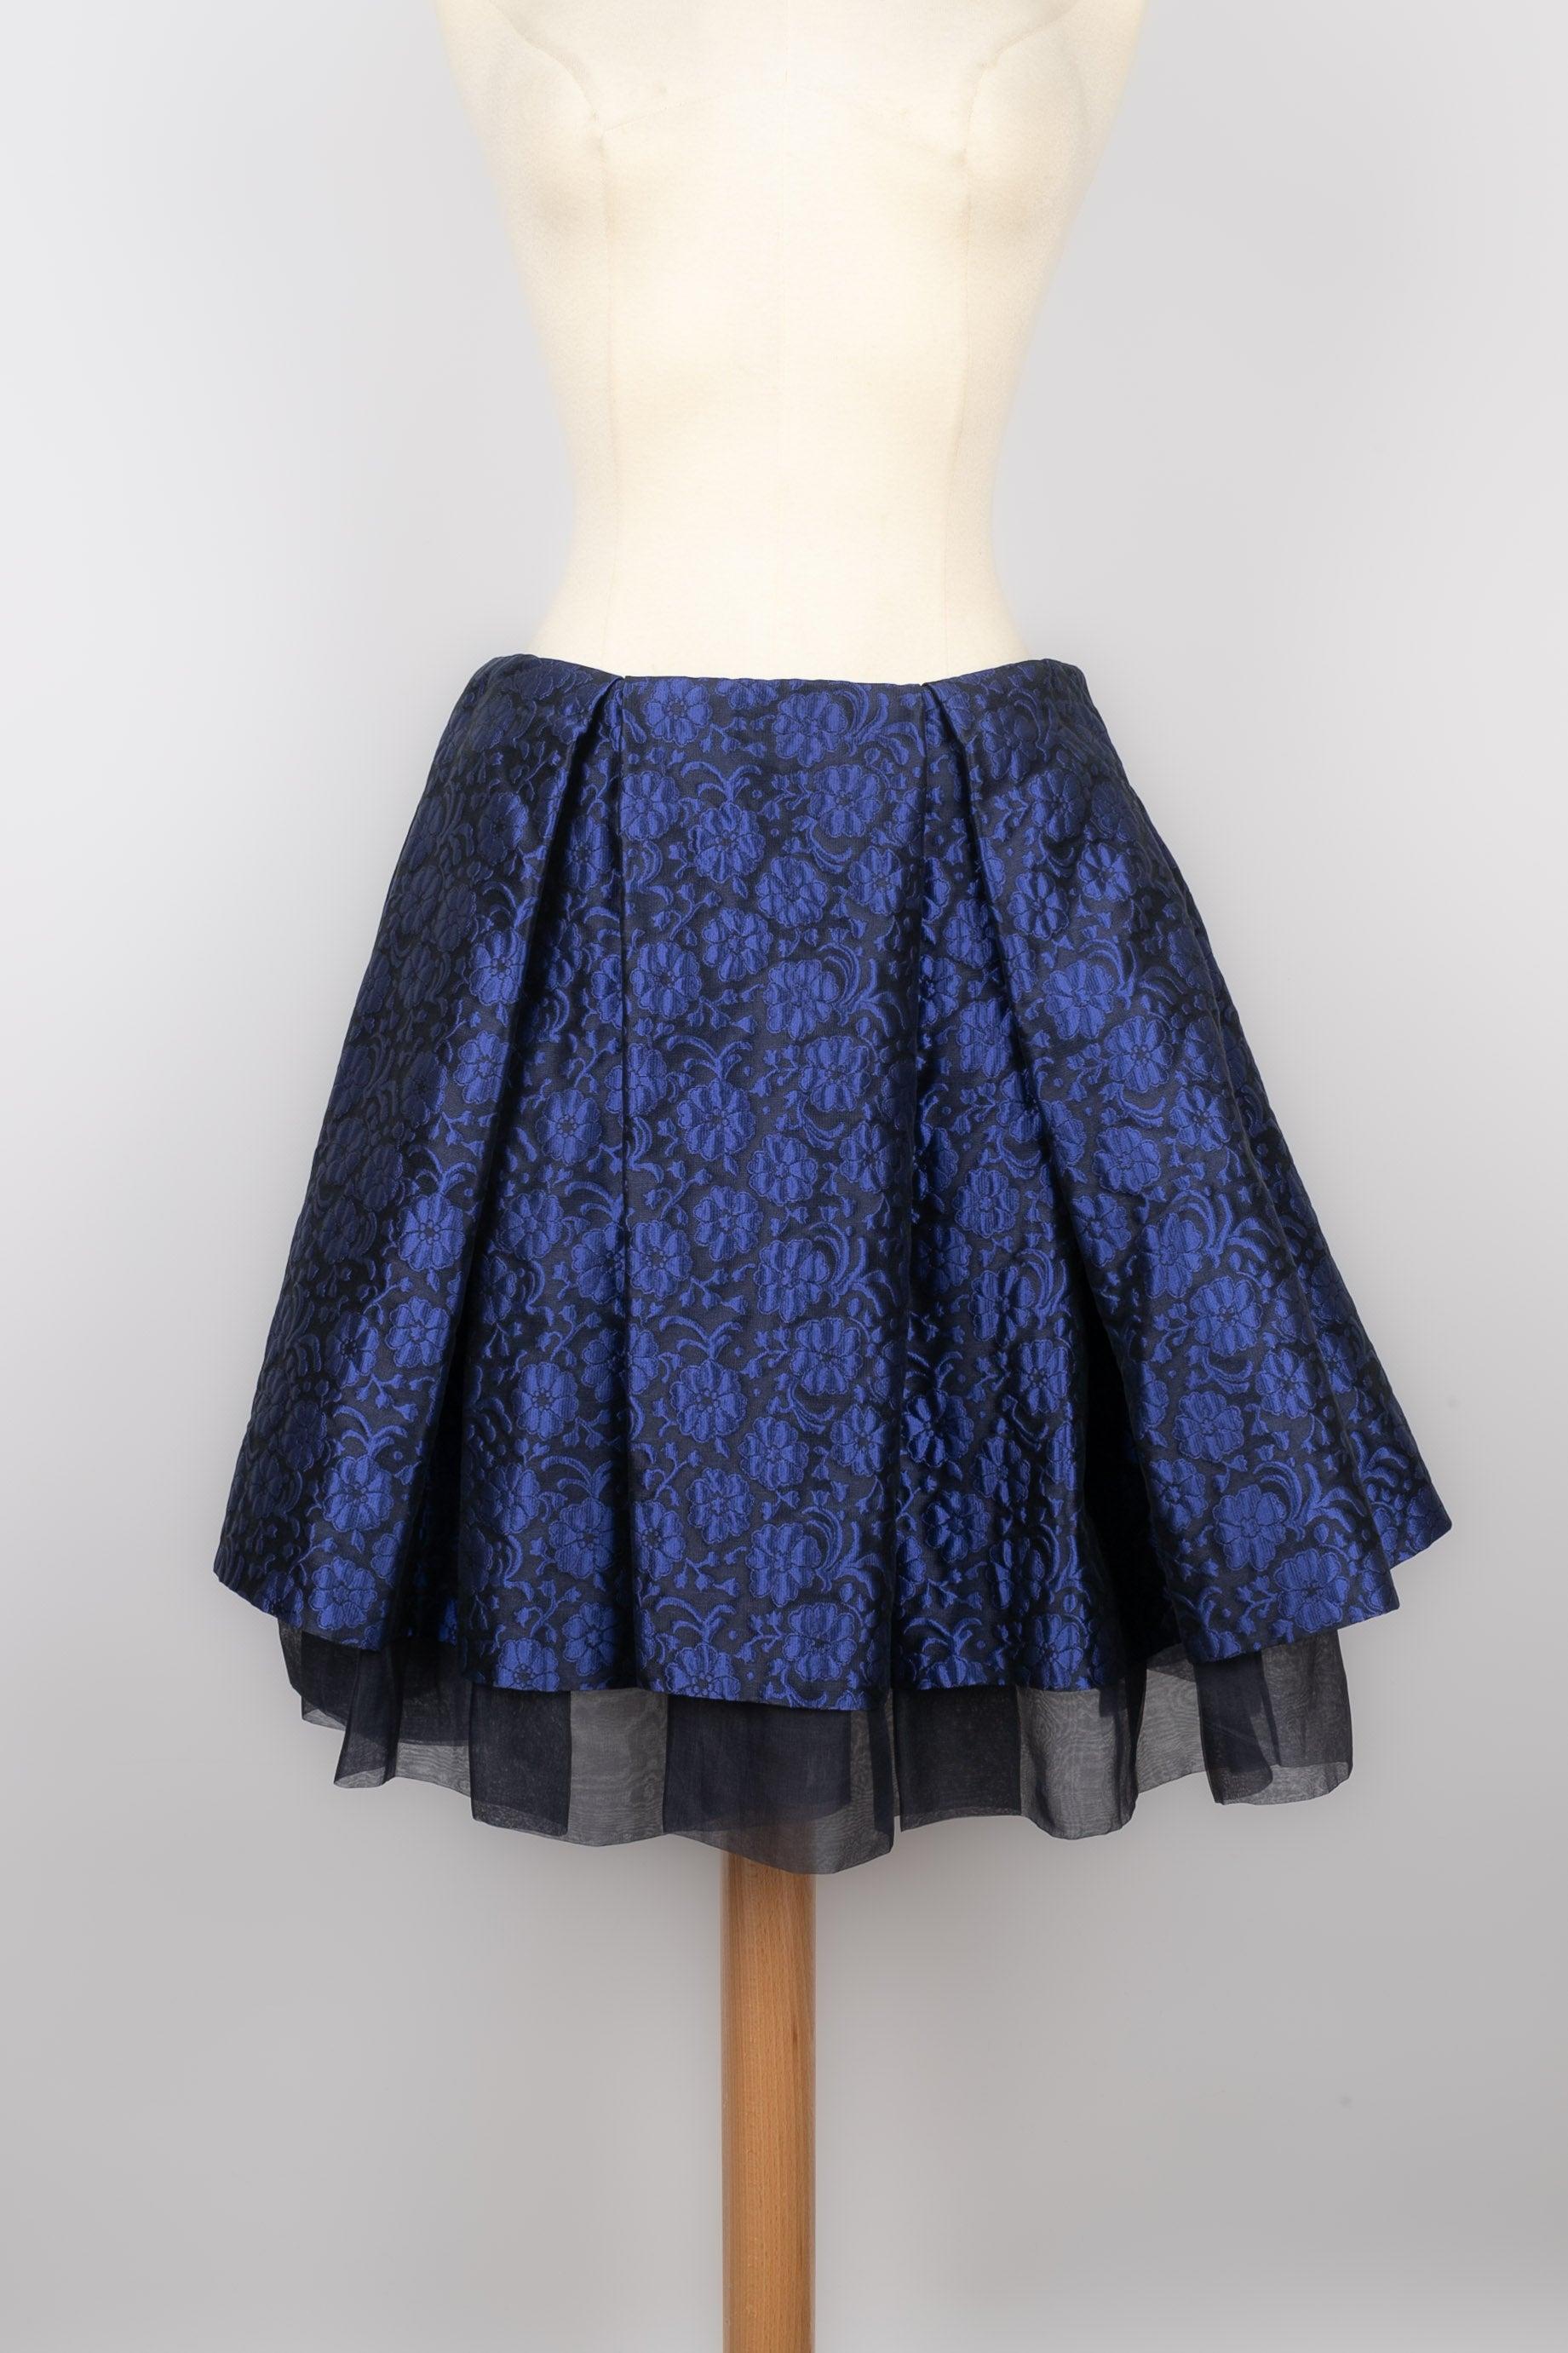 Women's Dior Gauffering Fabric Short Skirt with Silk Lining For Sale